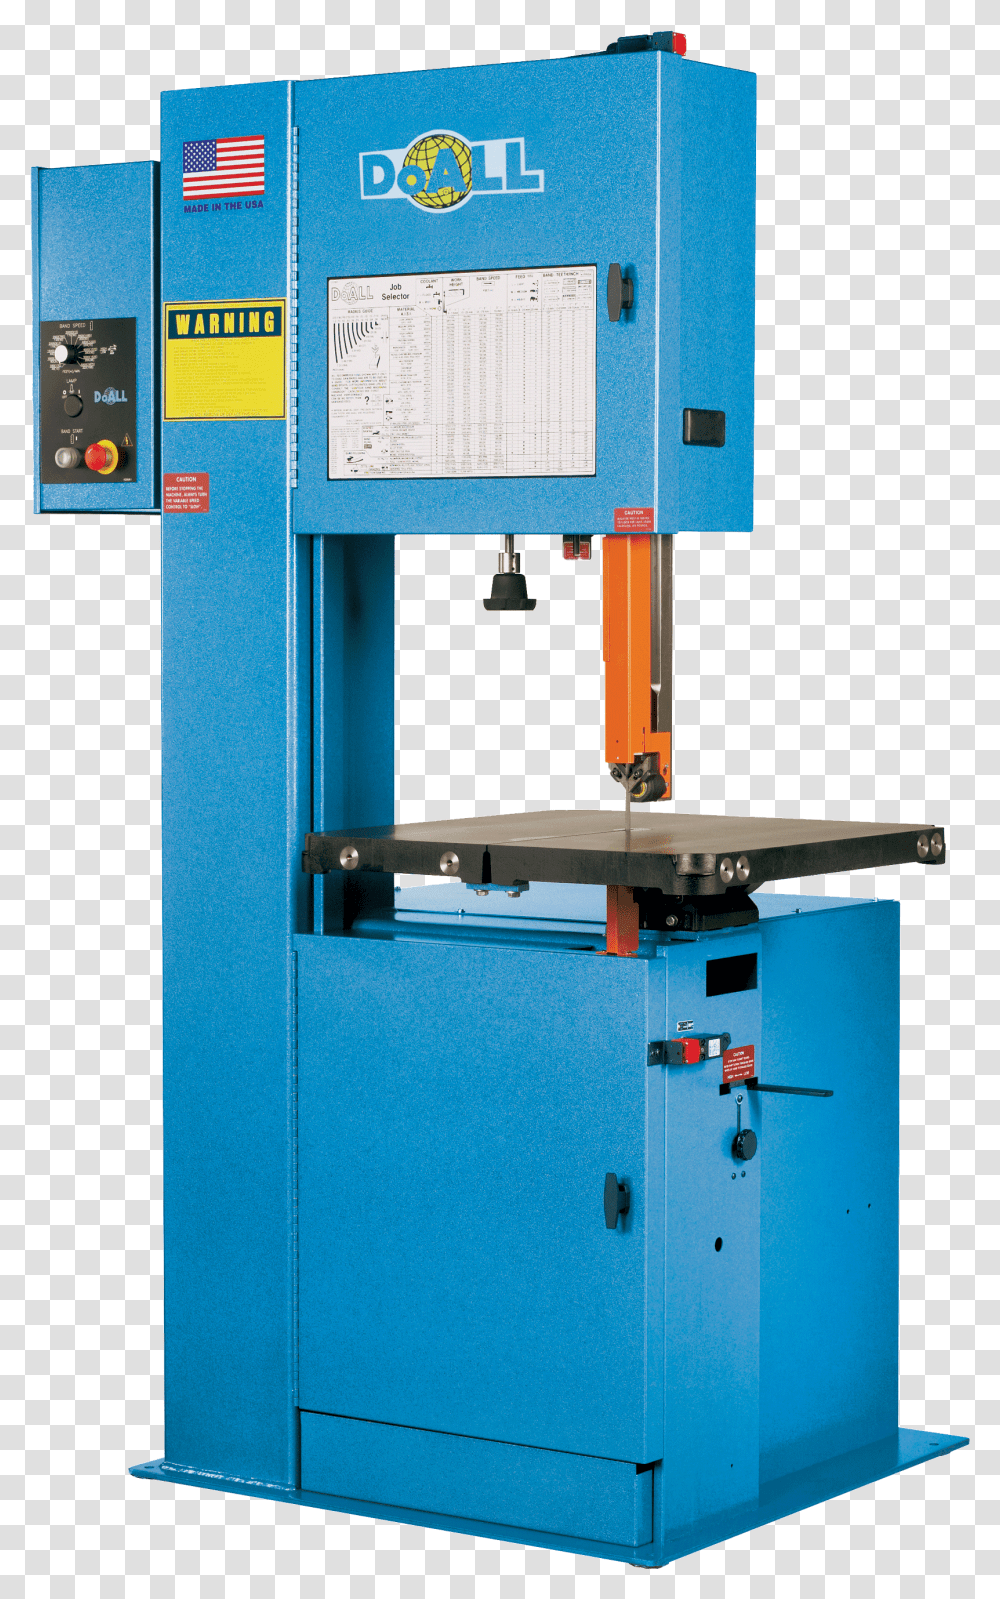 Do All Band Saw, Machine, Lathe Transparent Png